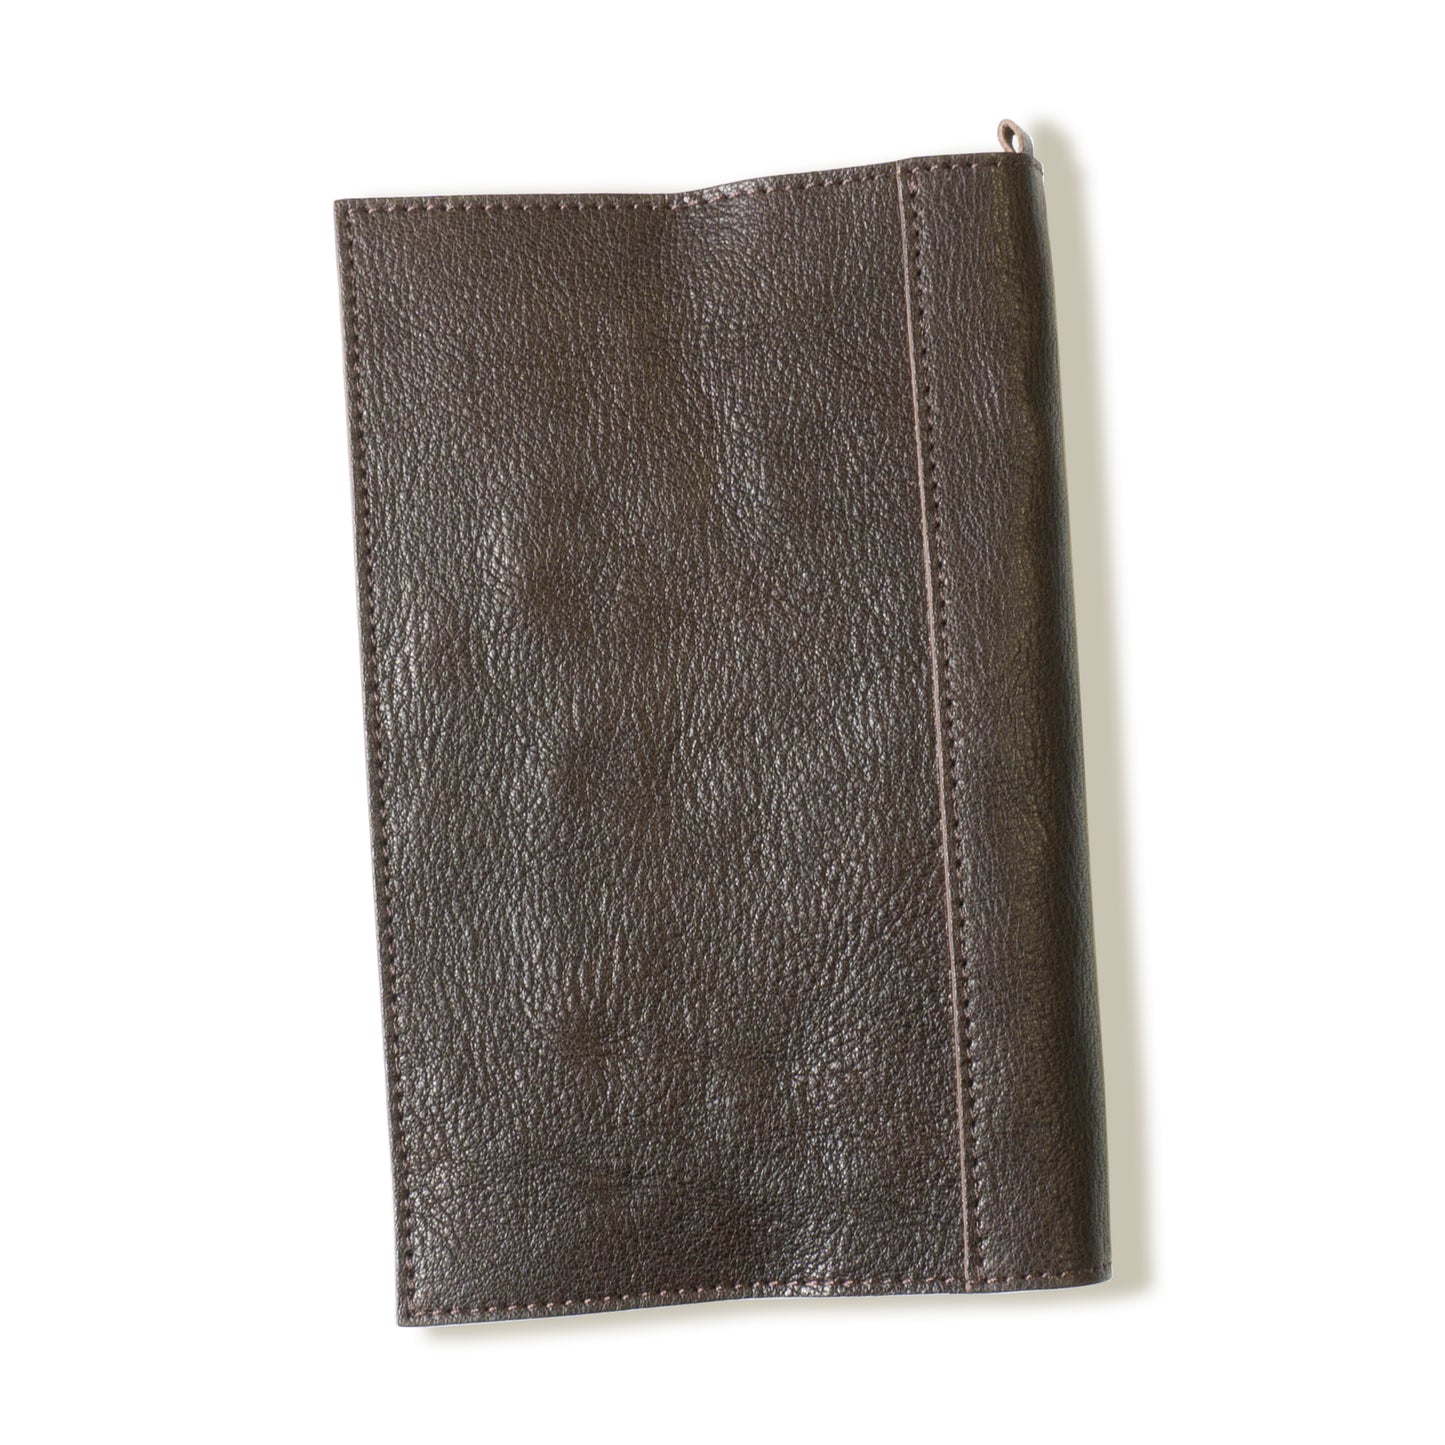 [Japanese Craftsman Made / Shrink] Book Cover "Shinsyo-ban" size Genuine leather with bookmark